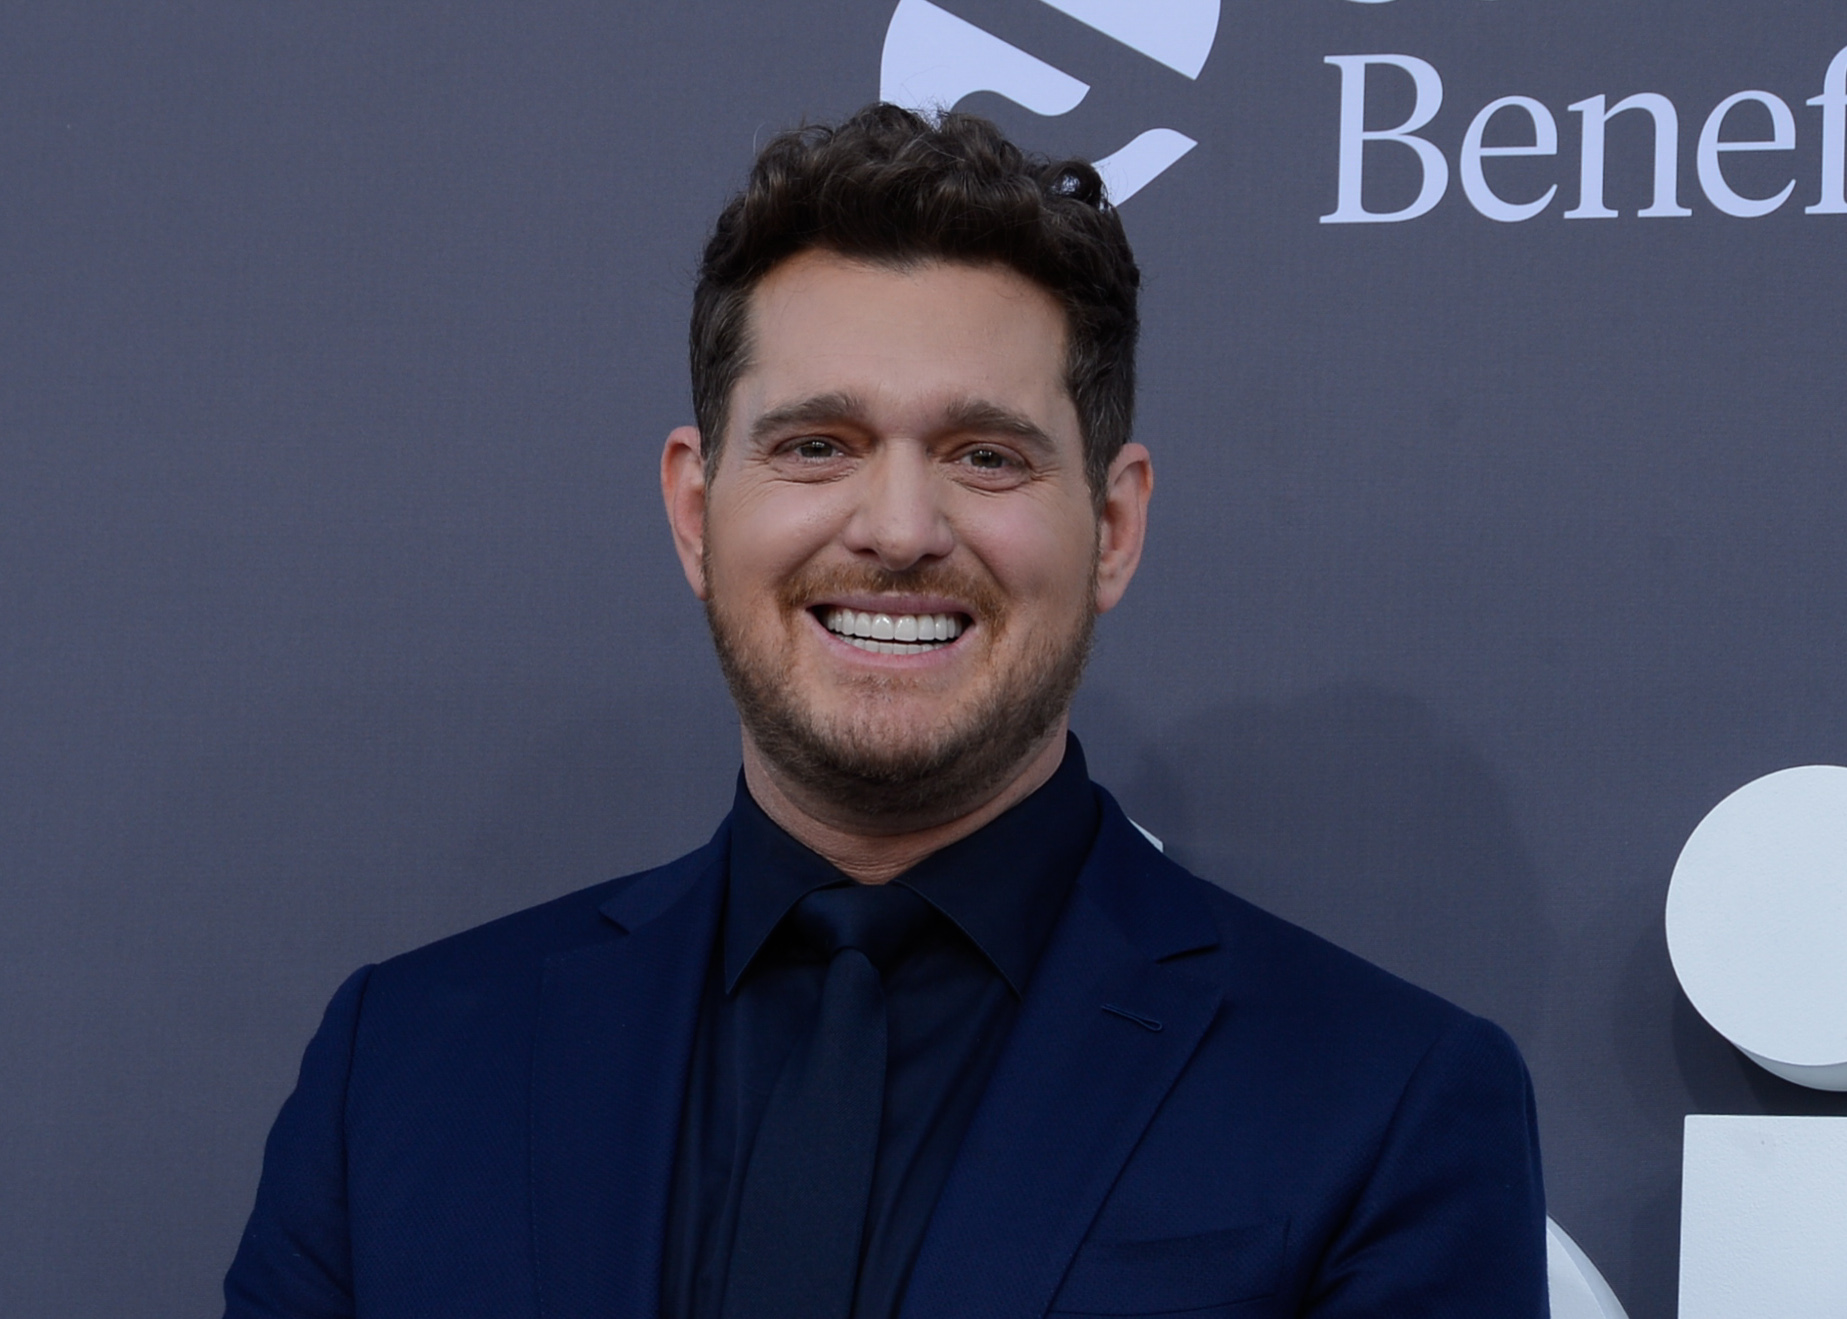 Michael Bublé at the Billboard Music Awards in Las Vegas, Nevada on May 15, 2022 | Source: Getty Images